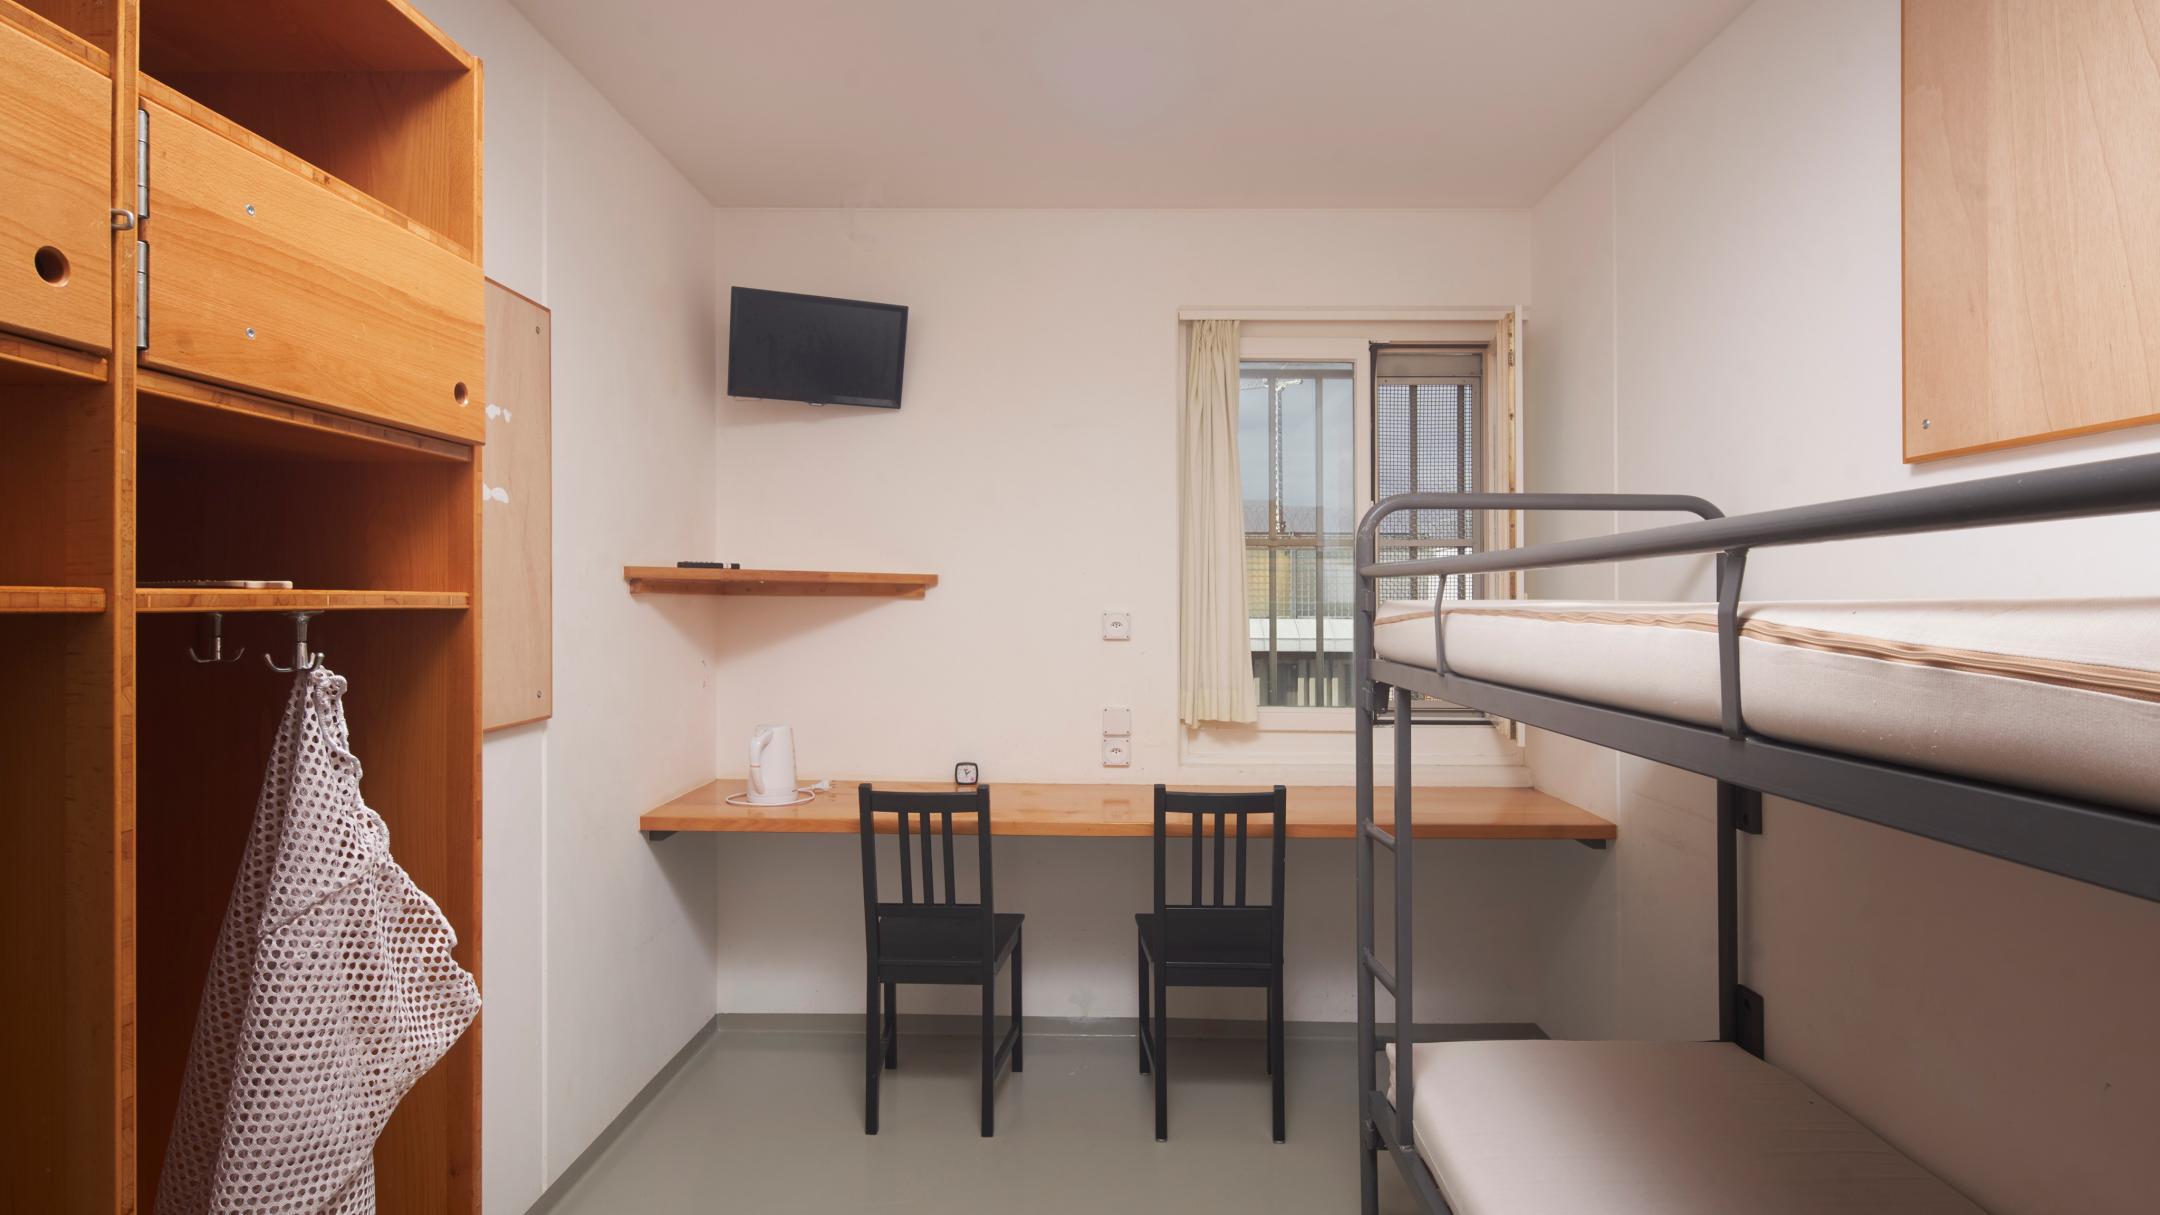 An unoccupied double cell with a bunk bed at the Pfäffikon Prison